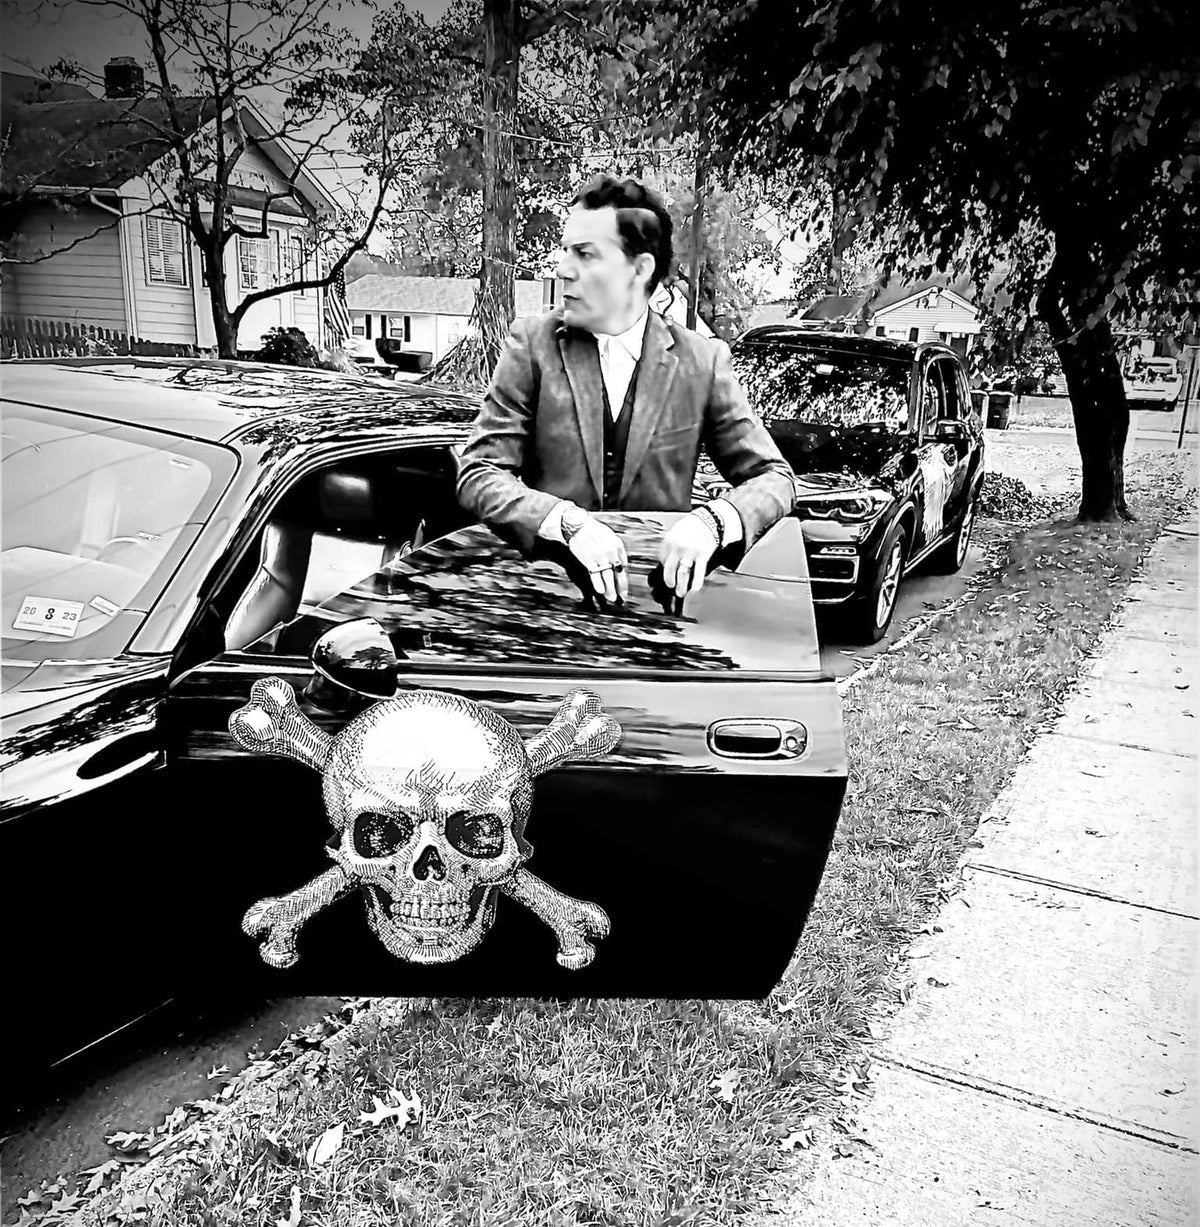 A man in a suit exiting a black car adorned with Skull & Crossbone Decals on the front grille, parked on a suburban street.